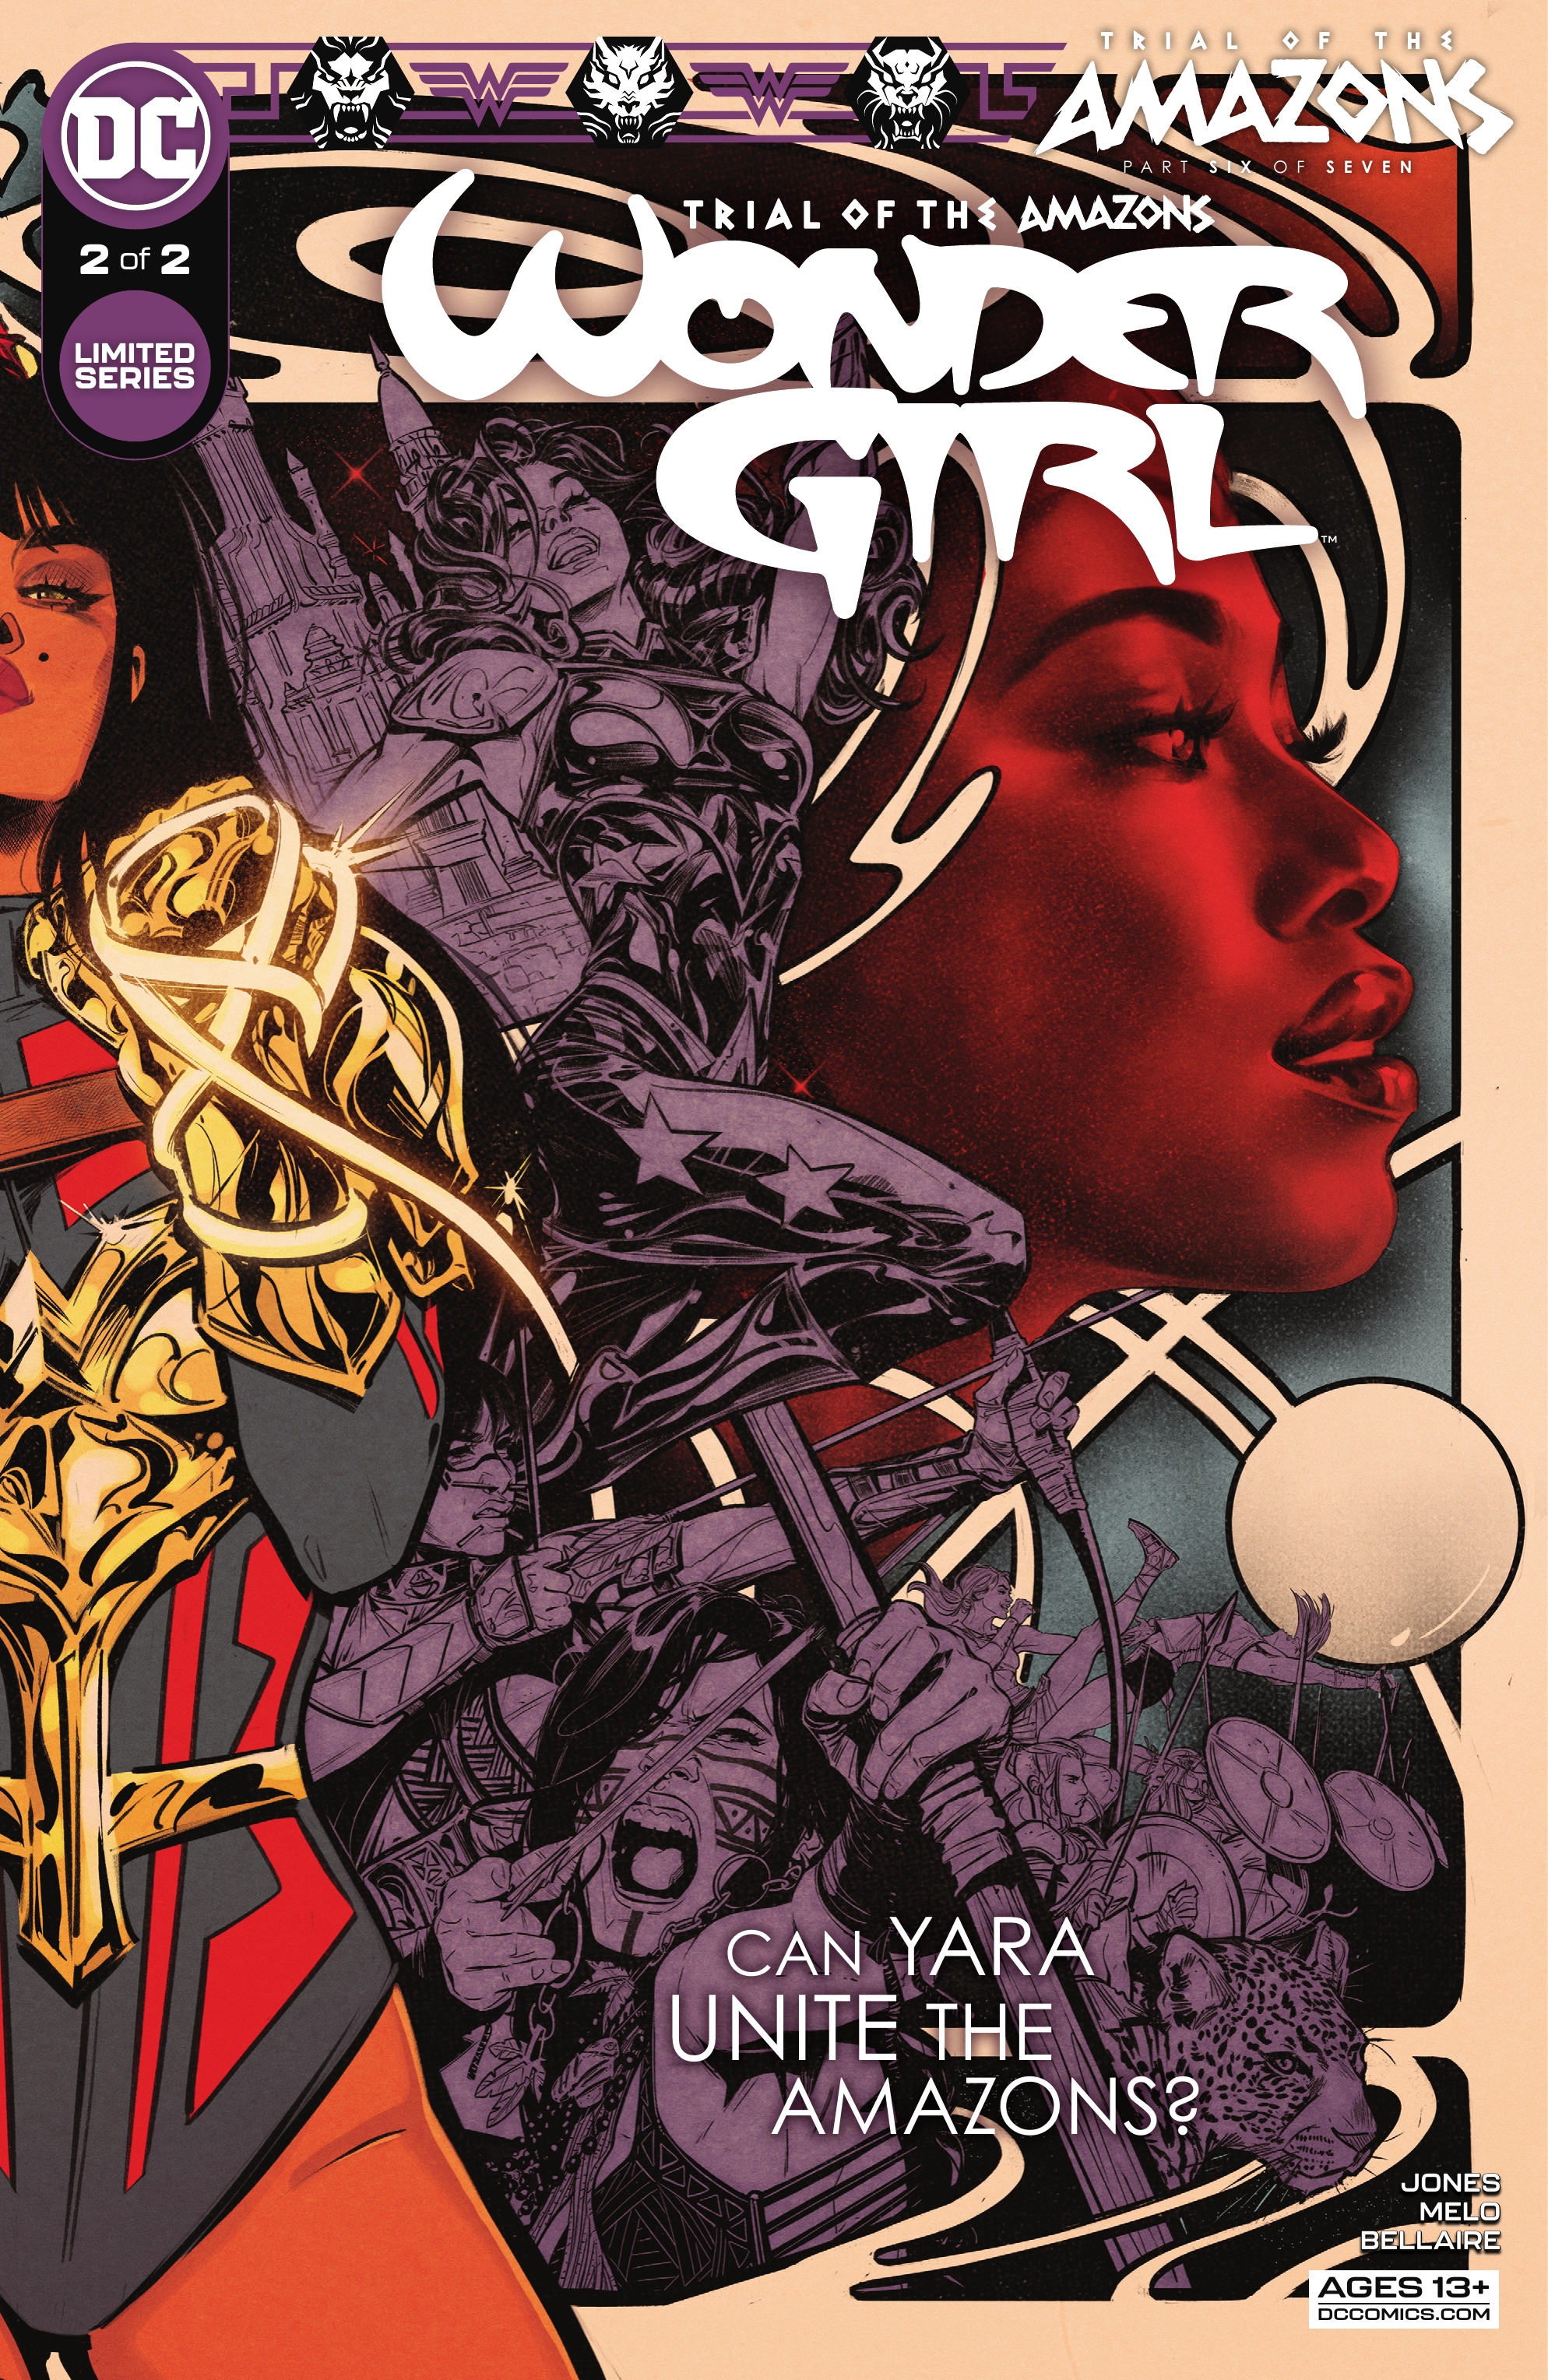 Read online Trial of the Amazons: Wonder Girl comic -  Issue #2 - 1